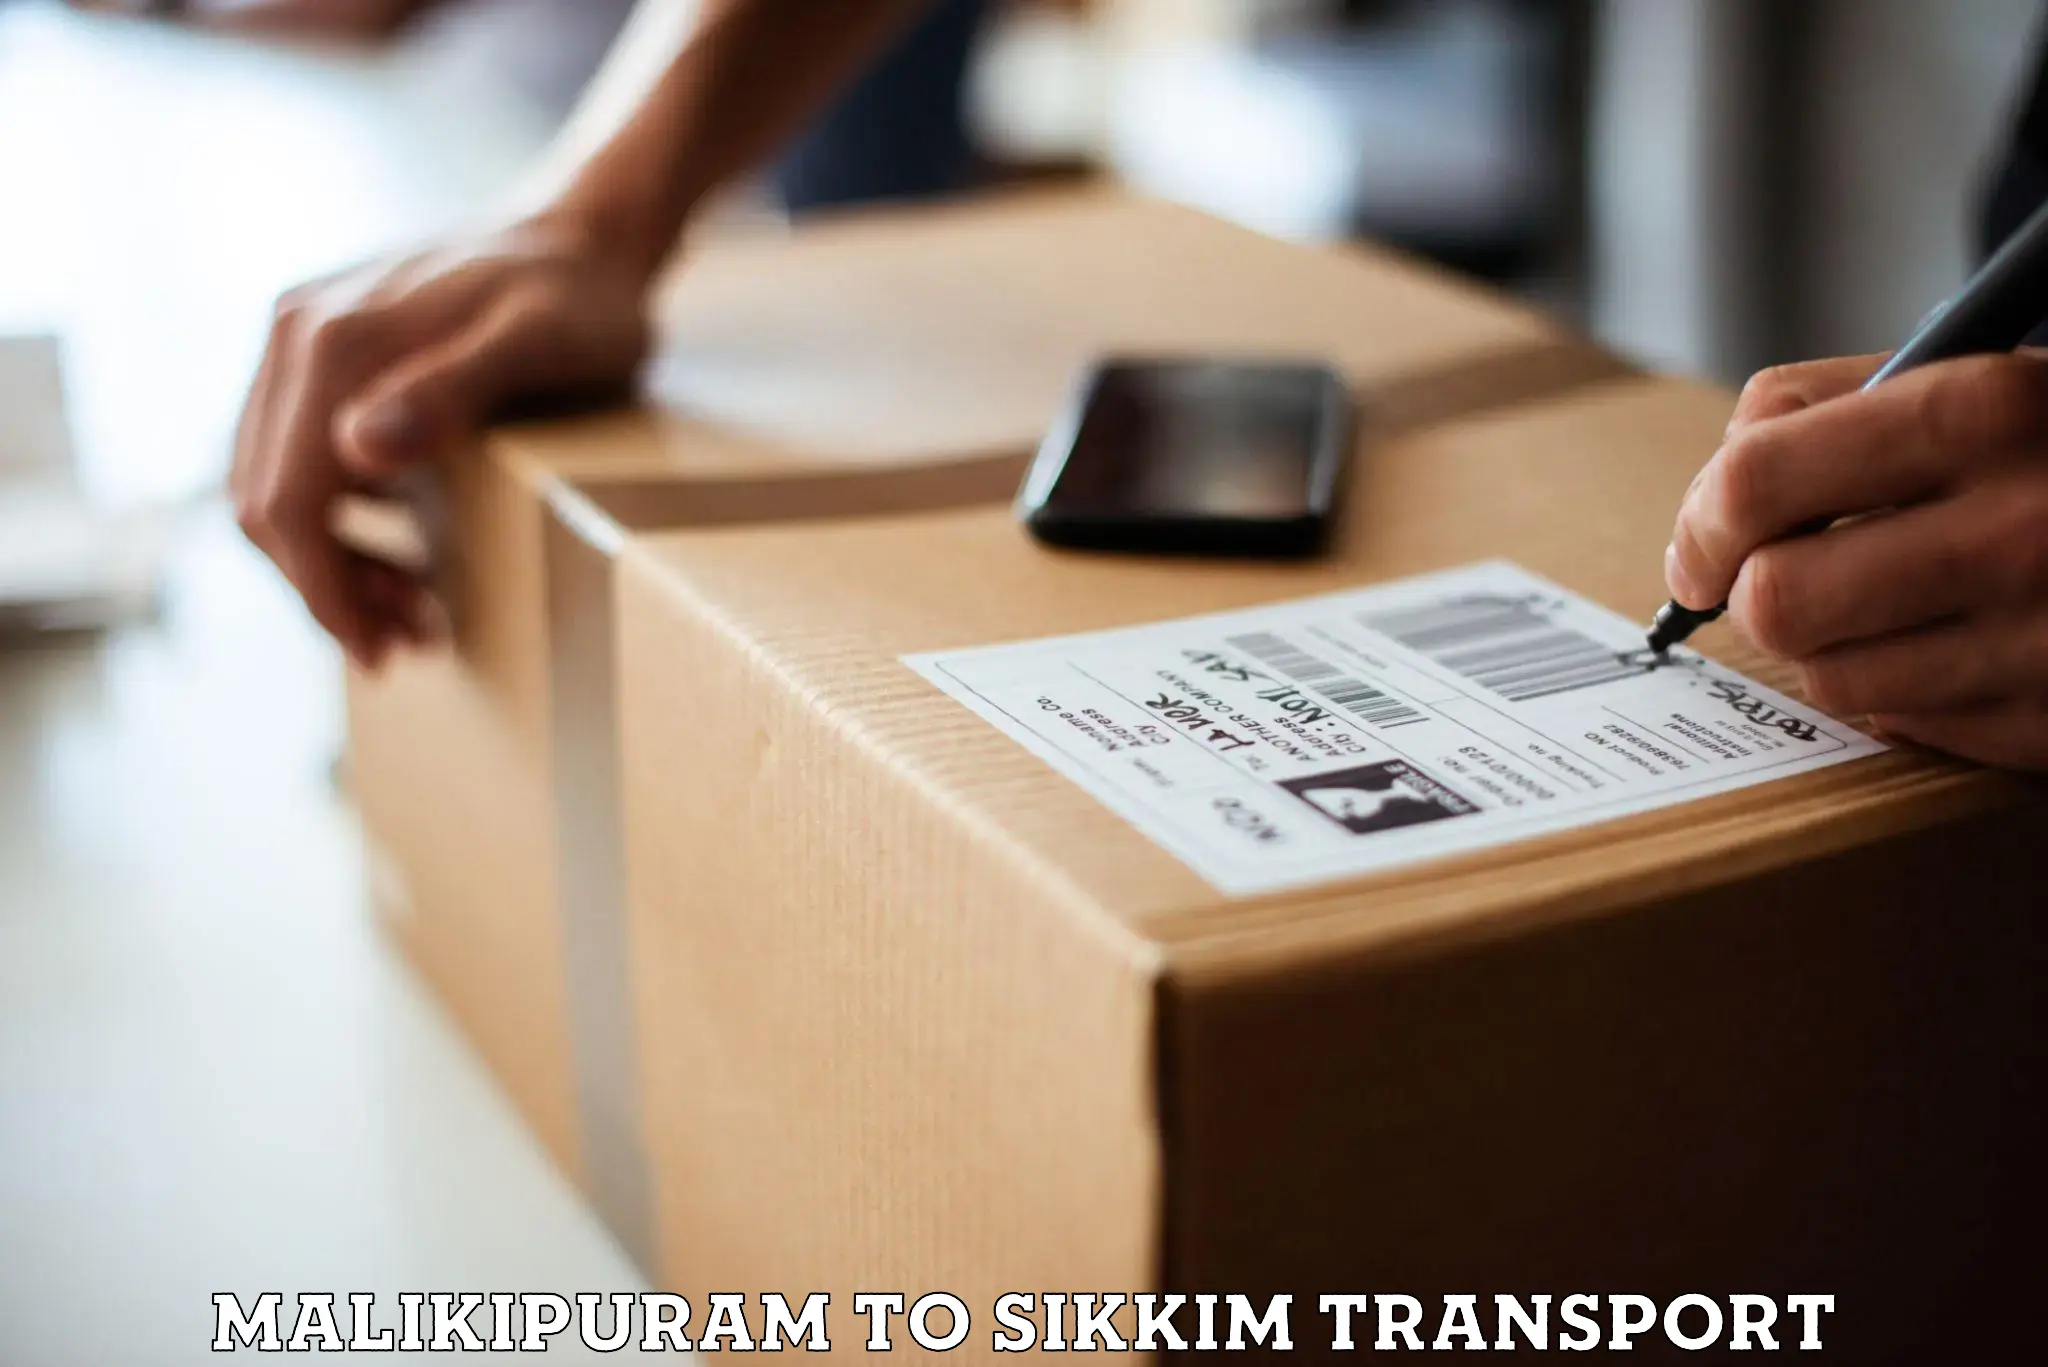 Shipping services in Malikipuram to North Sikkim